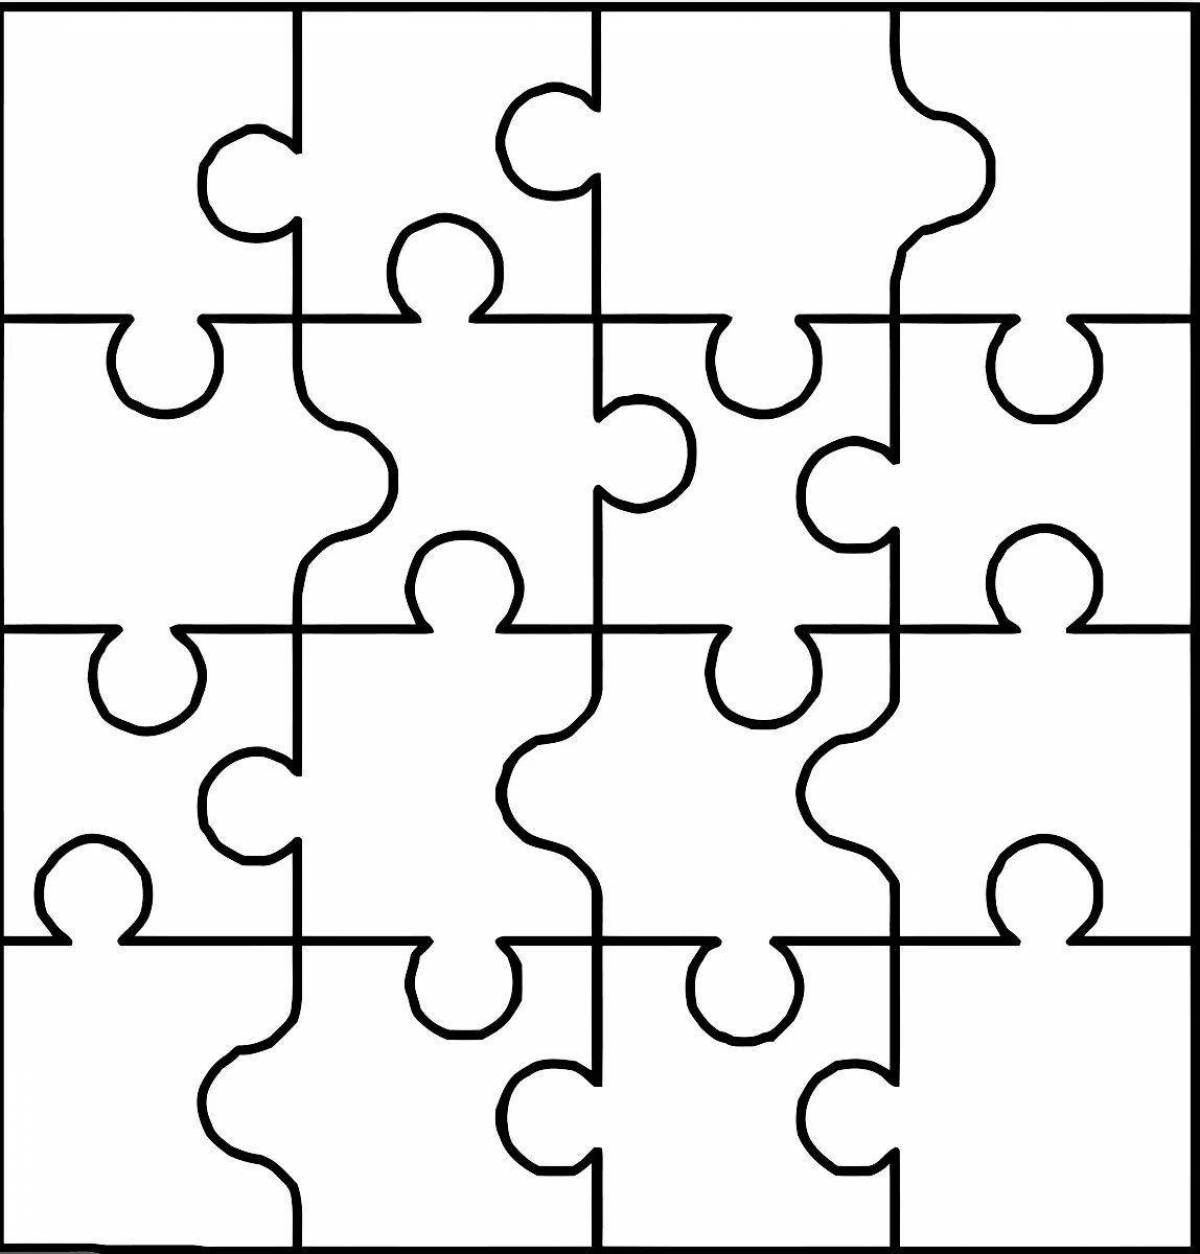 A fun coloring puzzle for kids